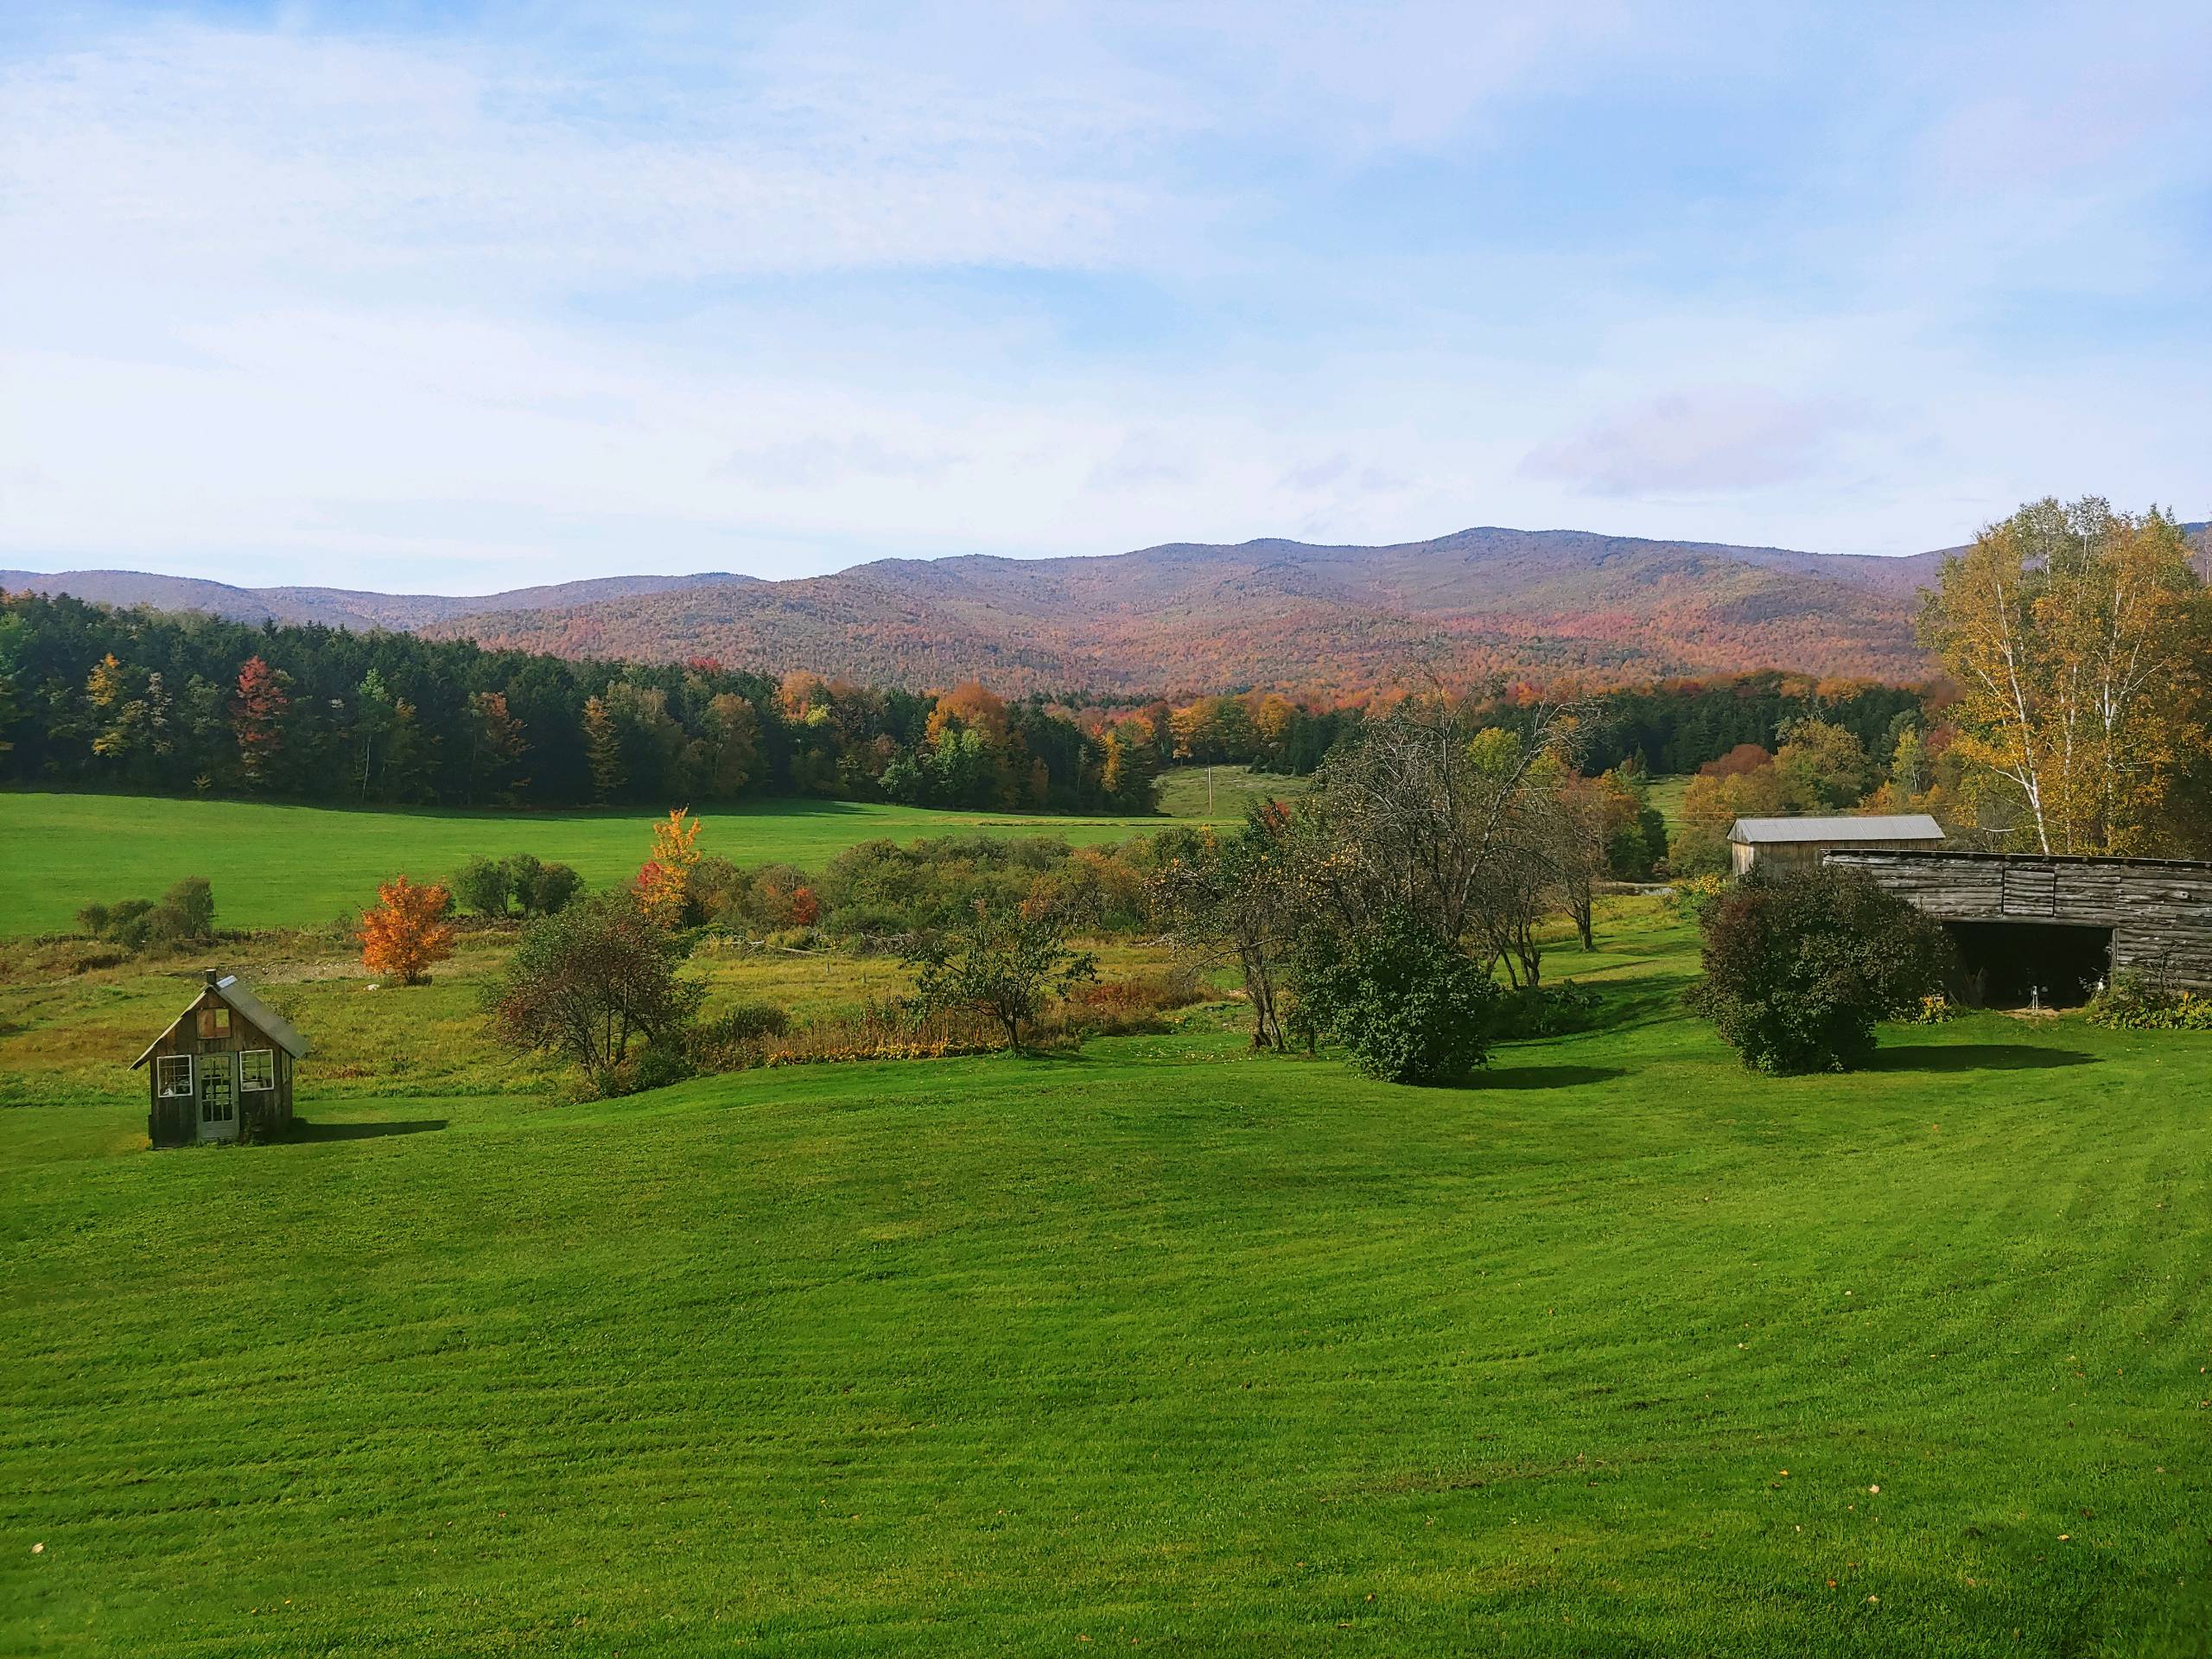 view of lost nation from Bent farm in Braintree VT peak foliage 10-11-21